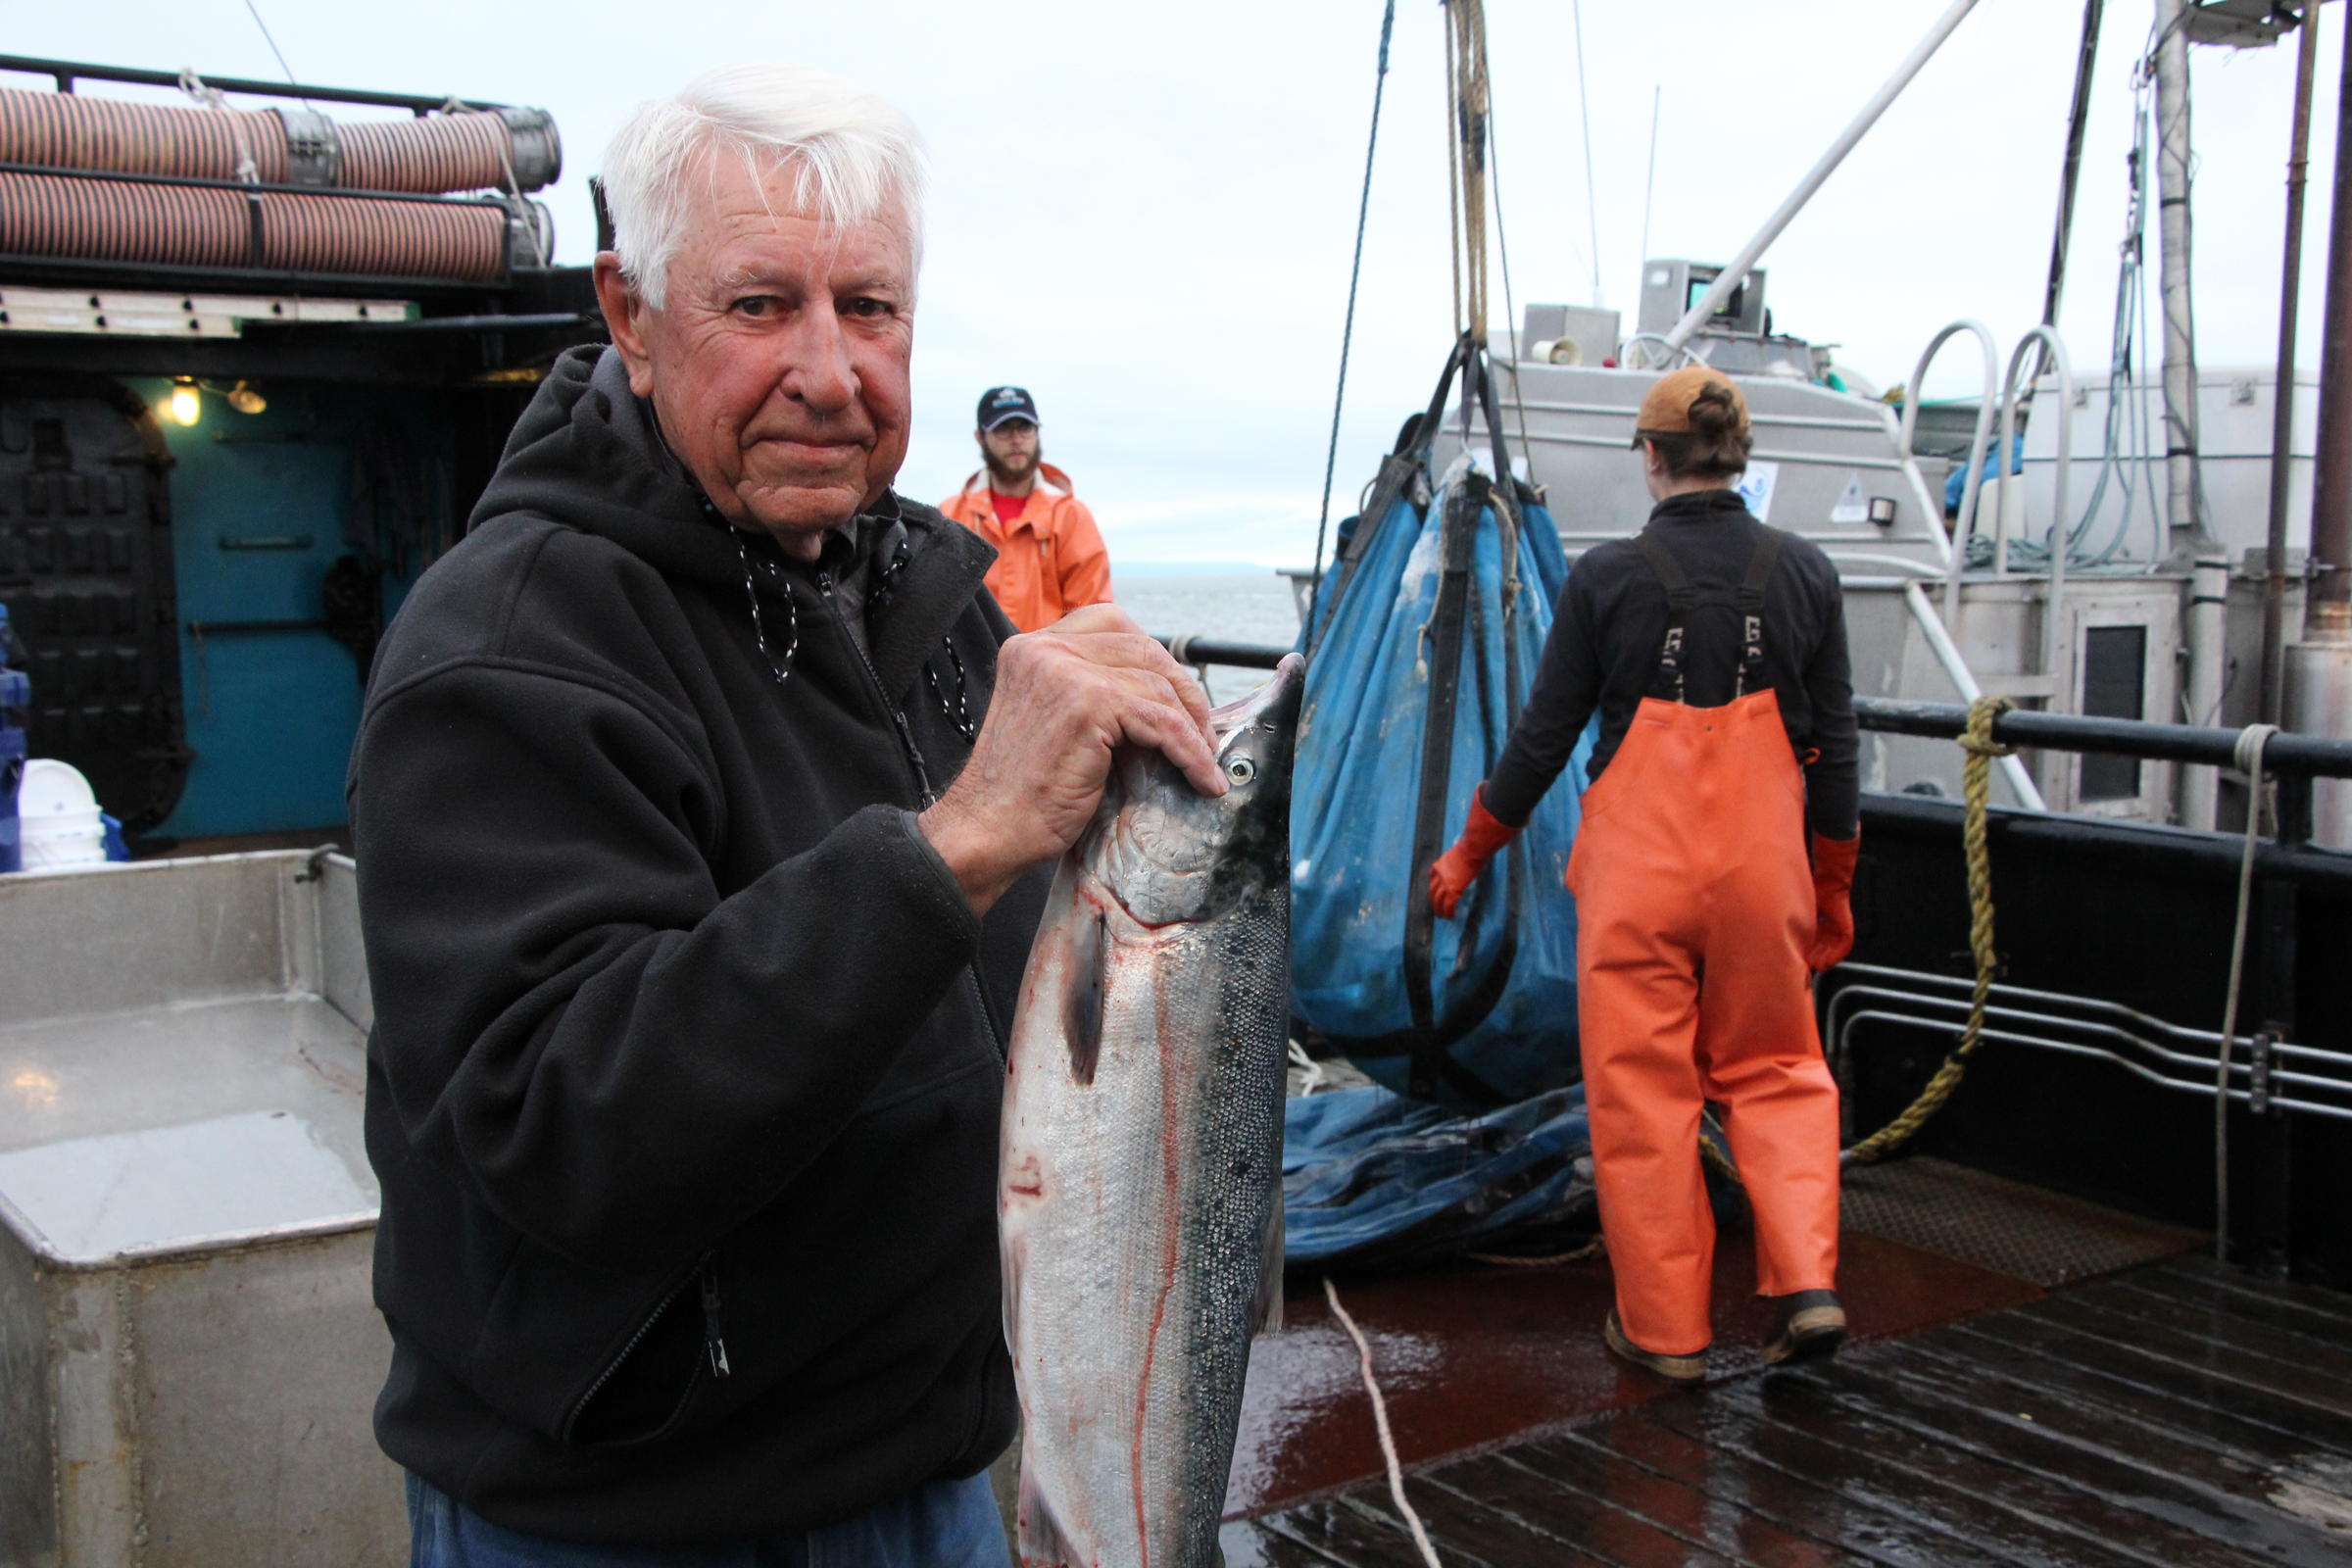 Skipper Howard Knutsen, 86, delivered Bristol Bay's two billionth salmon to the F/V Lady Helen in Ugashik. One of his salmon made it's way to the Governor. (Photo by KDLG)